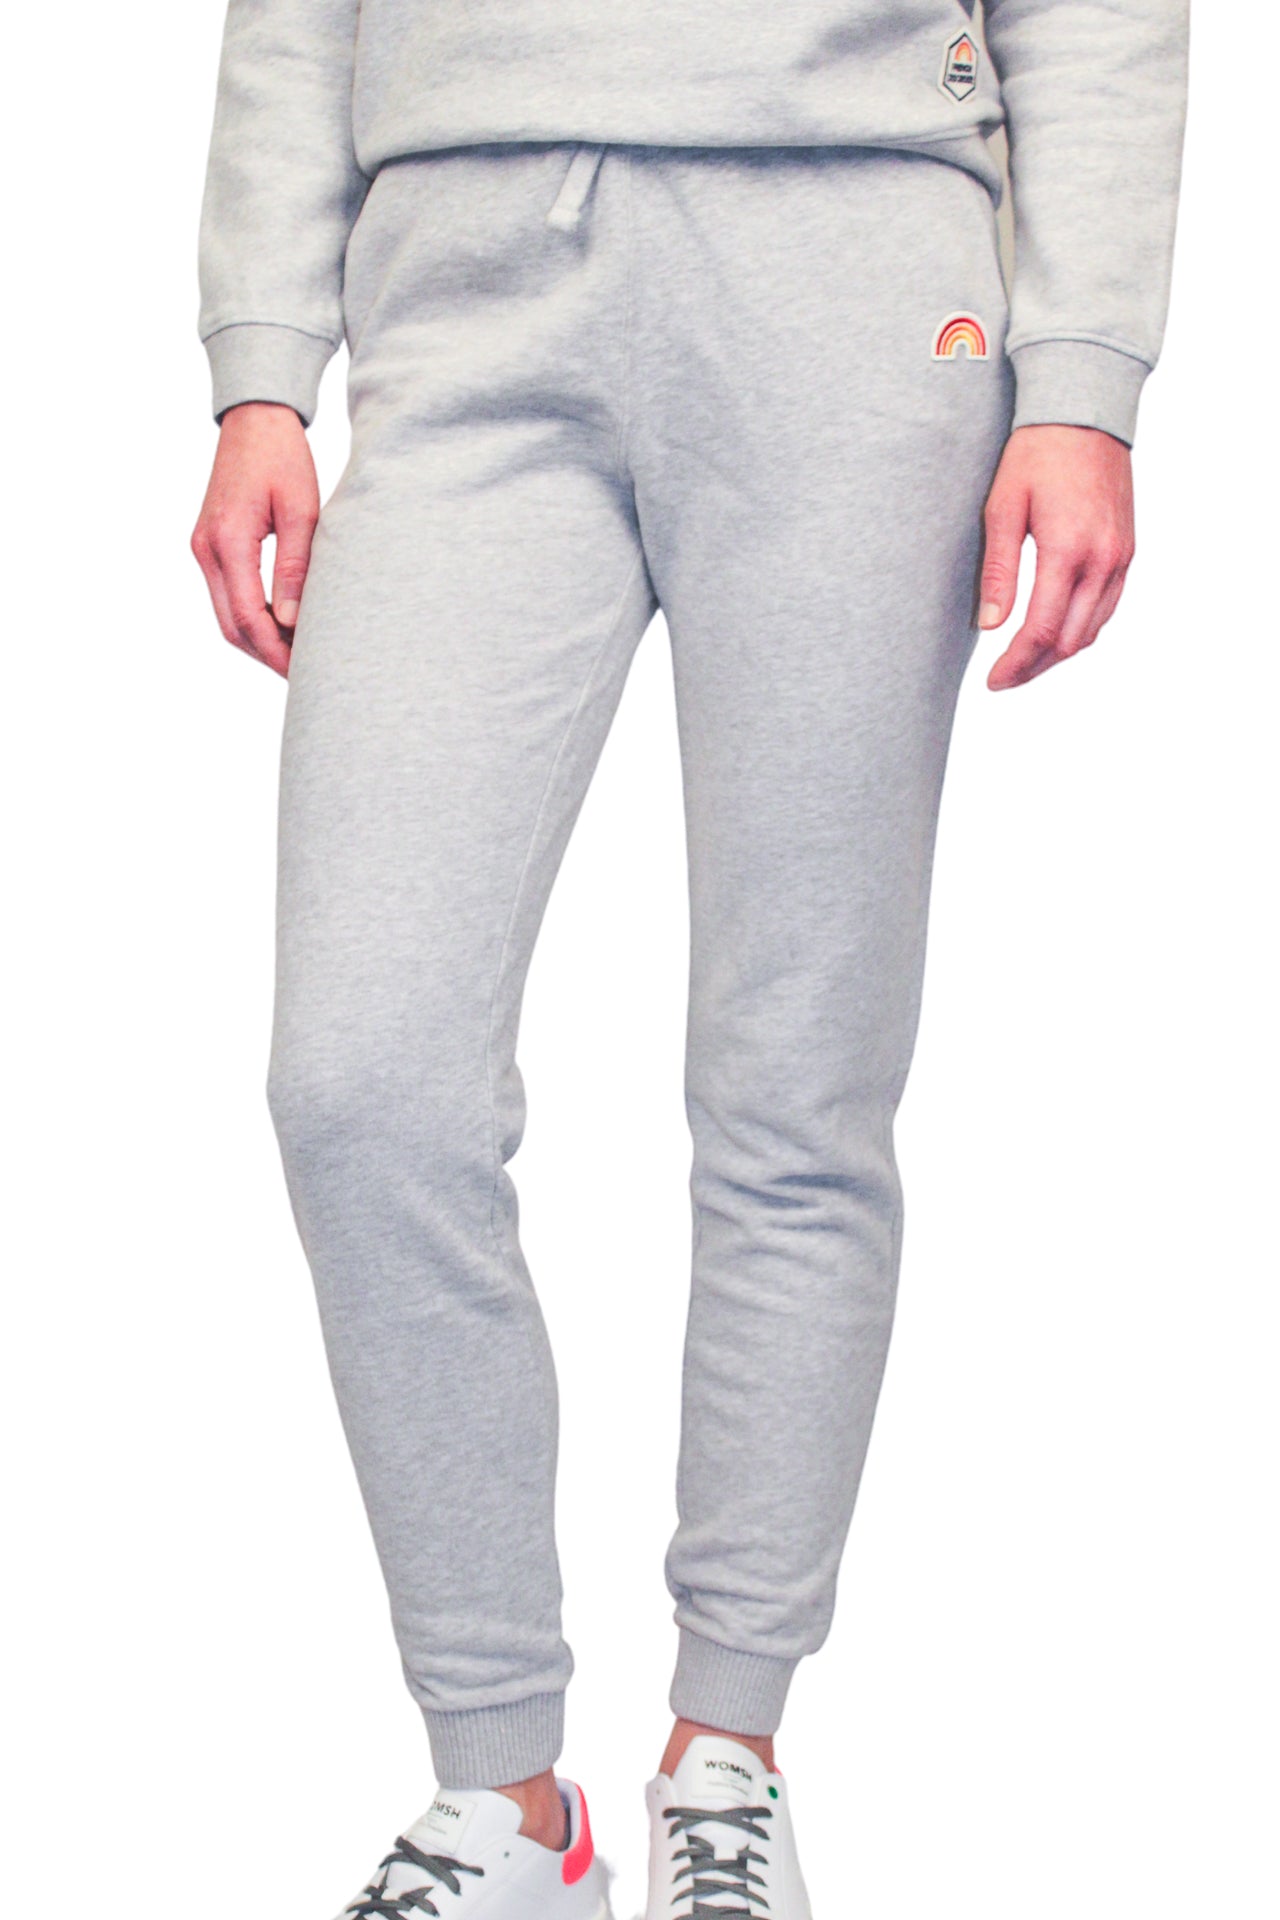 French Disorder Rainbow Melrose Jogger Sweatpants (Final Sale)